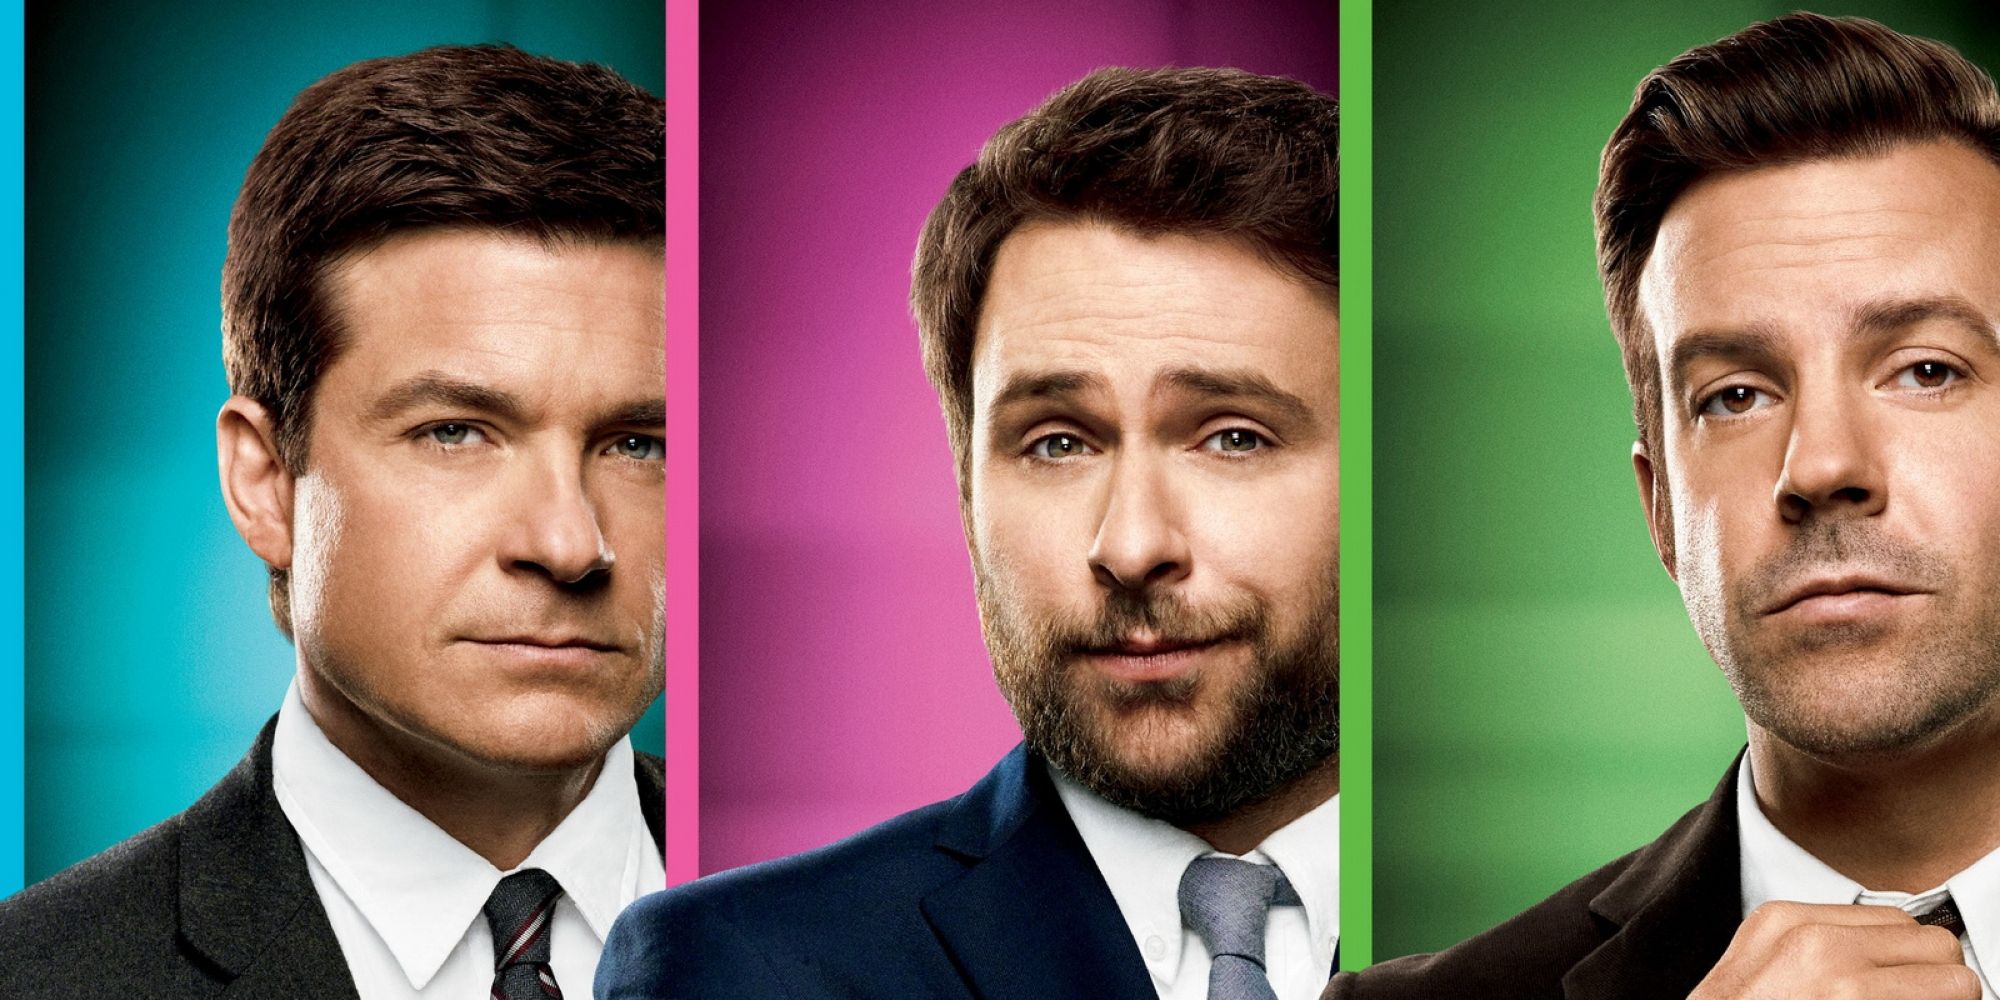 Jason Bateman, Charlie Day, and Jason Sudeikis on the poster for Horrible Bosses